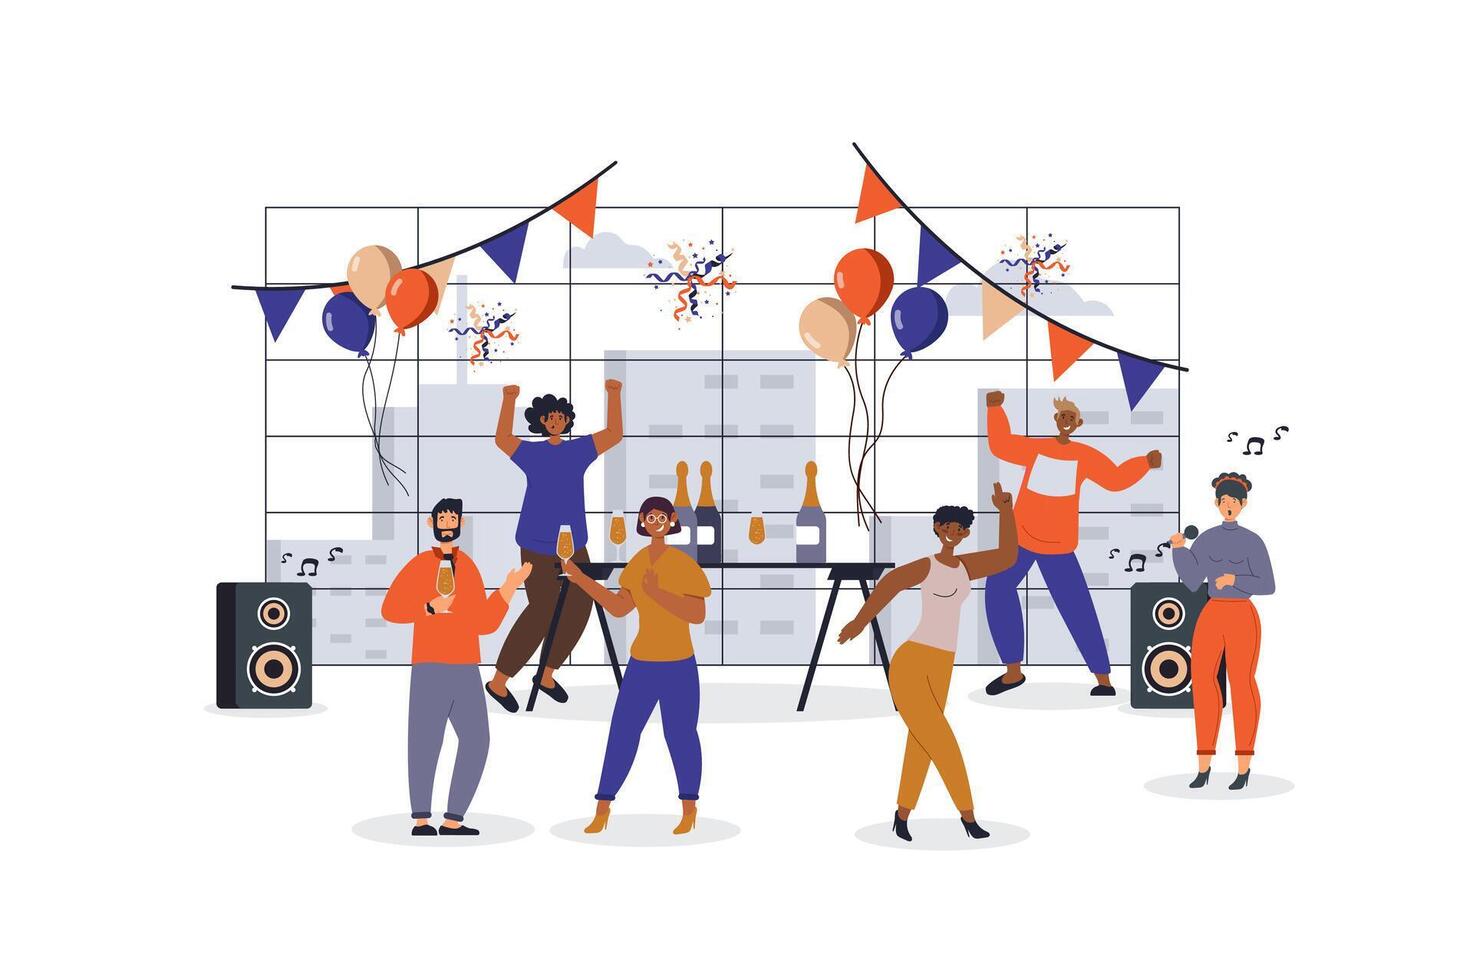 Holiday party concept with character scene for web. Women and men dancing, drinking, celebrate at festive event together. People situation in flat design. Vector illustration for marketing material.